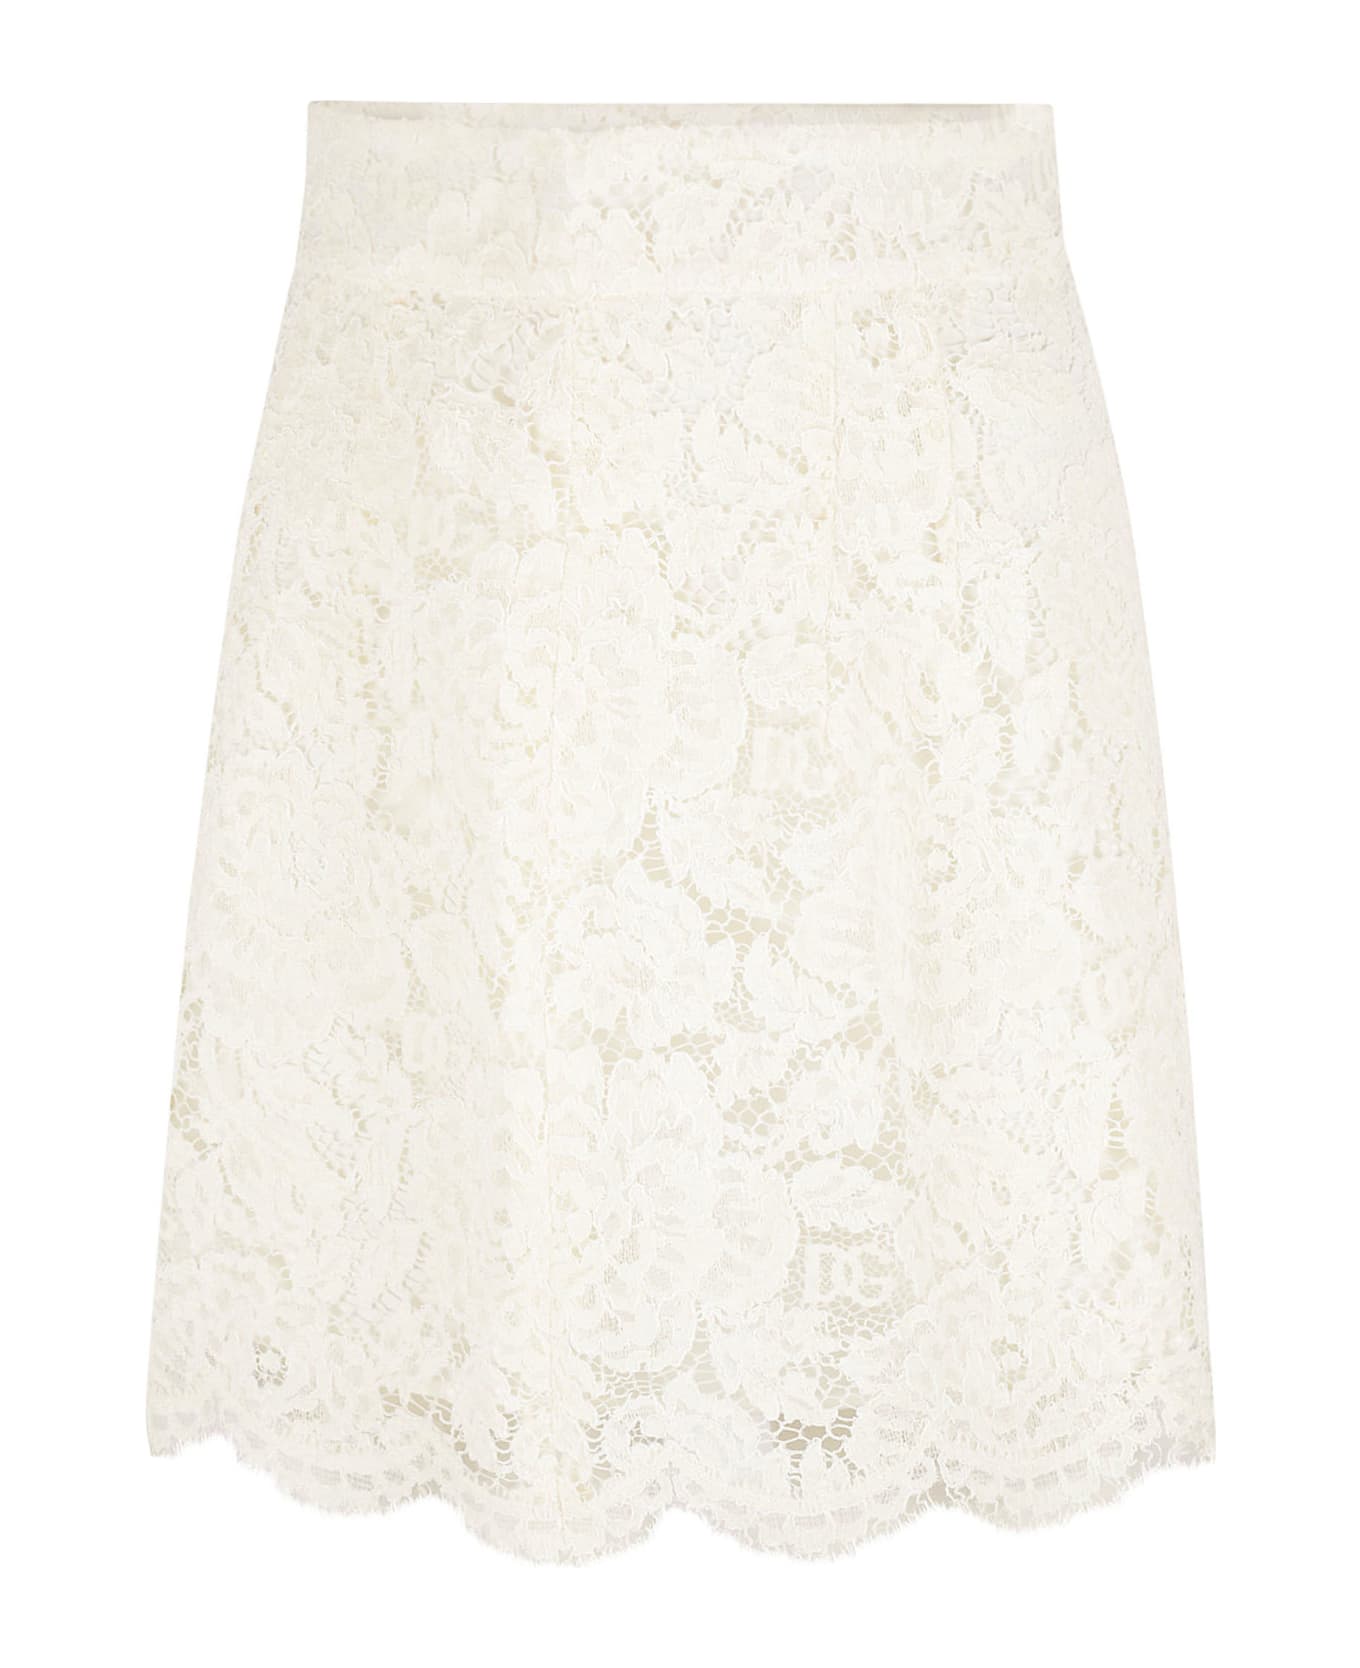 Dolce & Gabbana Floral Embroidered Perforated Skirt - Bianco naturale スカート